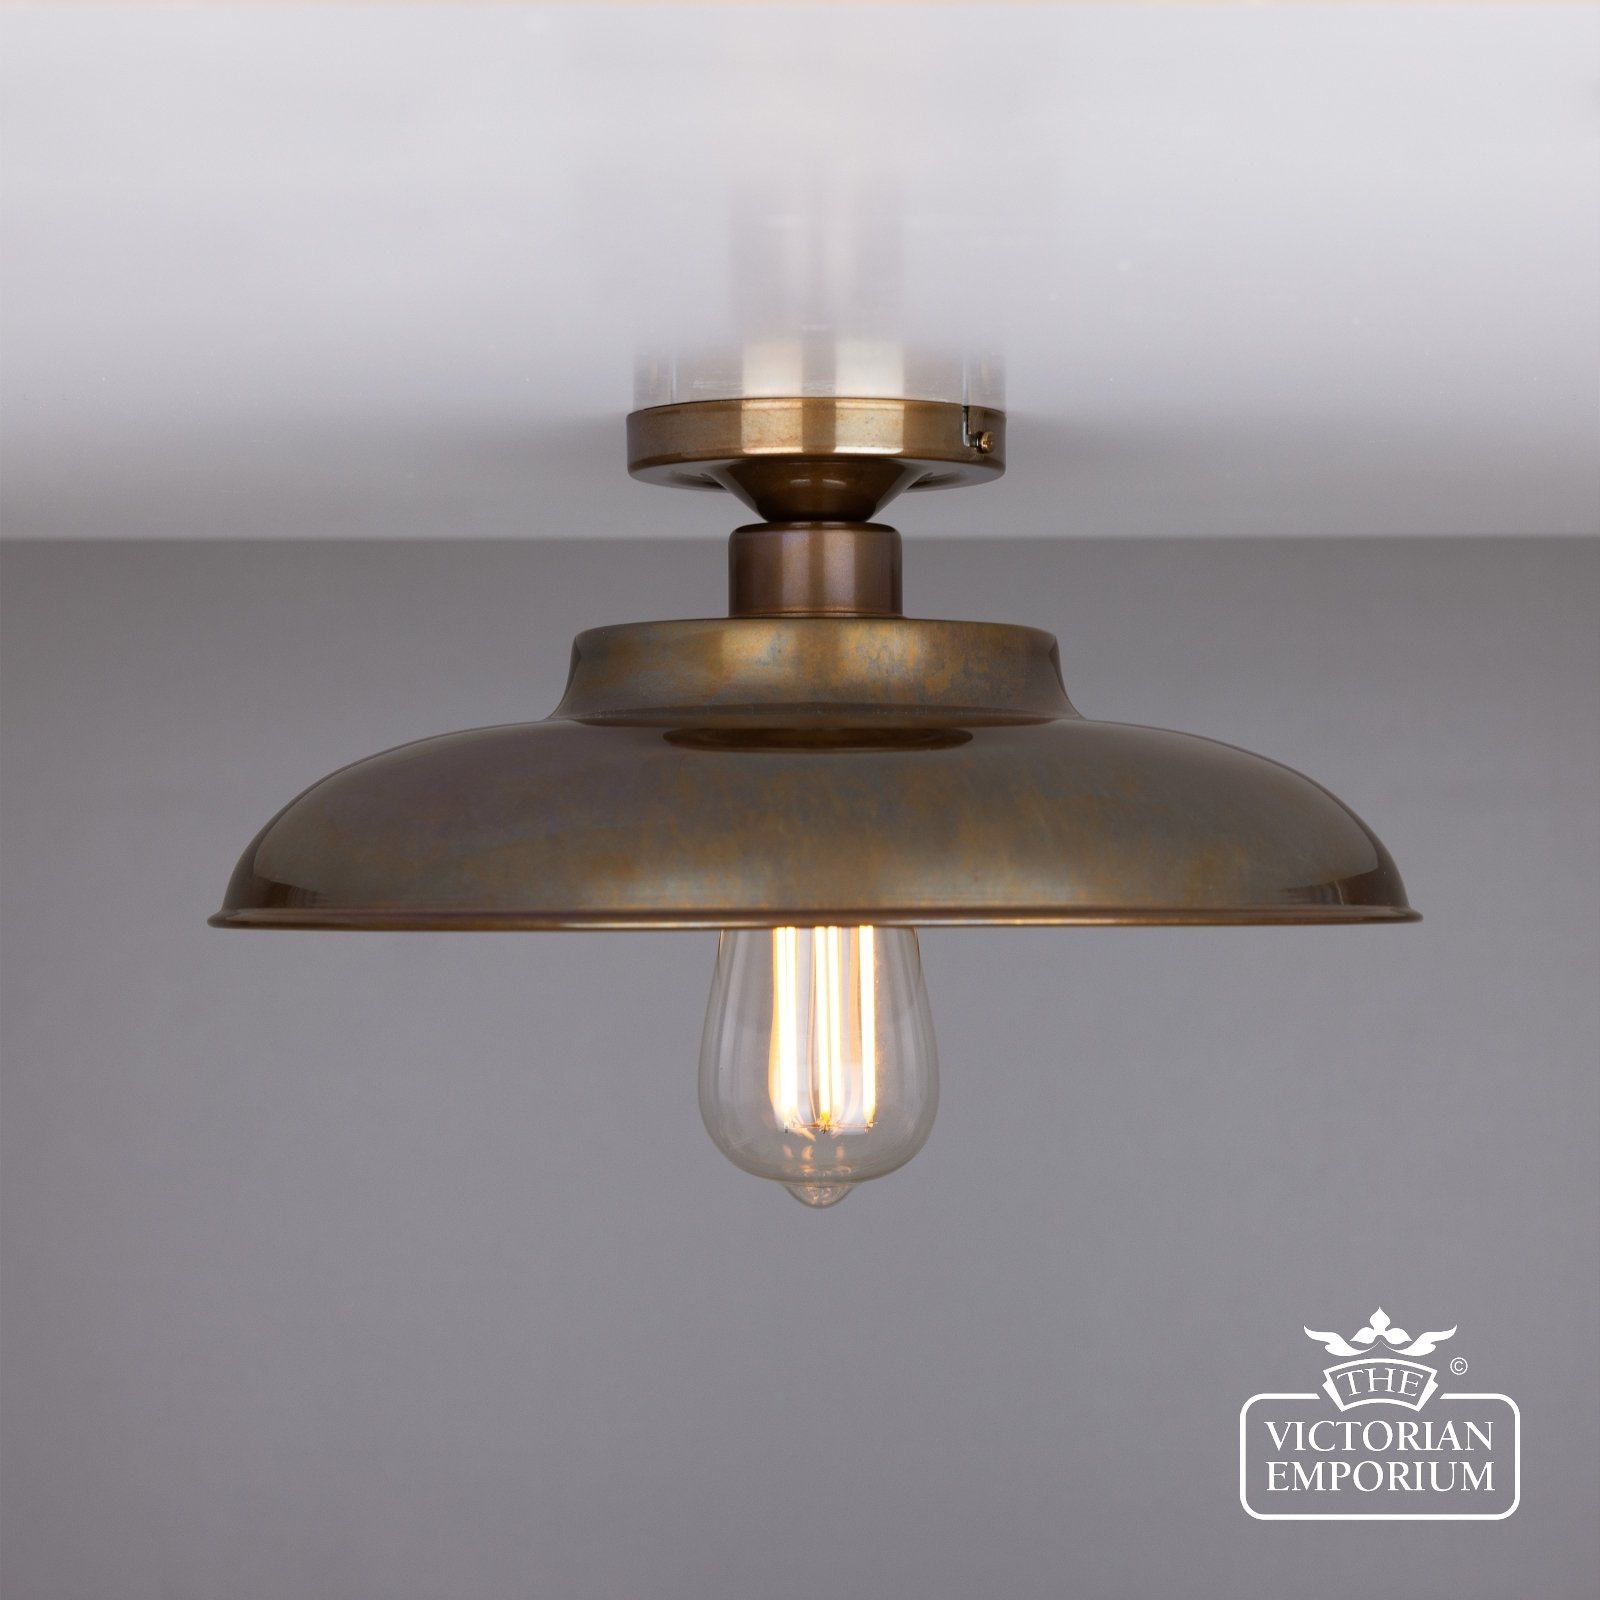 Tela Flush Ceiling Light in a choice of finishes